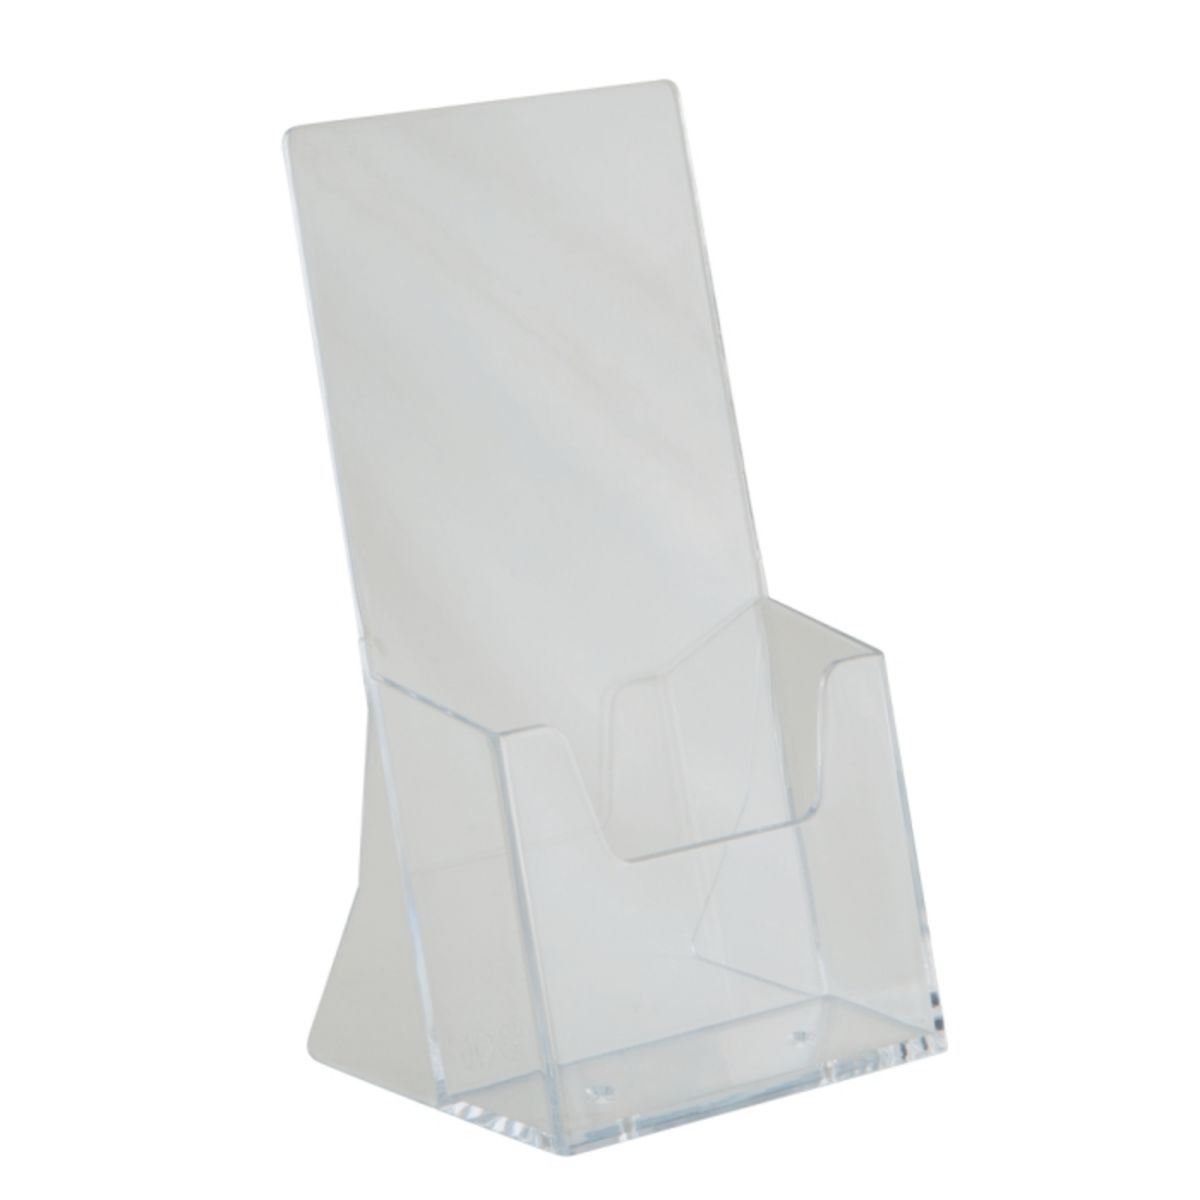 Single tier leaflet holder in 1 3 A4 (one third A4).png